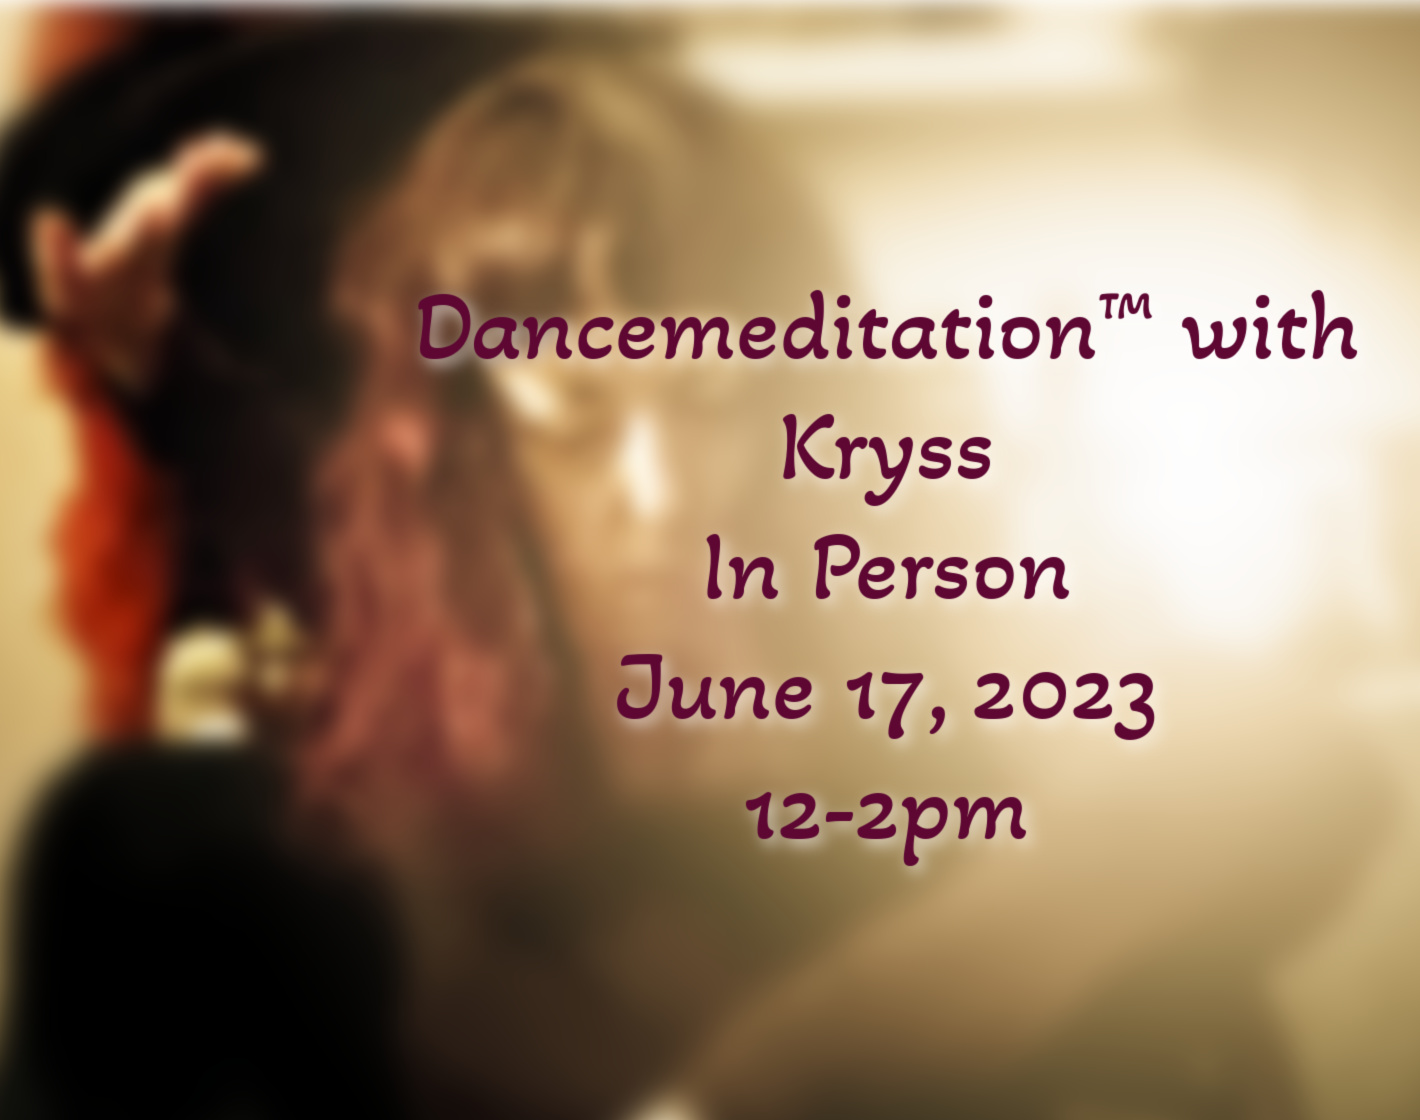 In Person Dancemeditation™ with Kryss